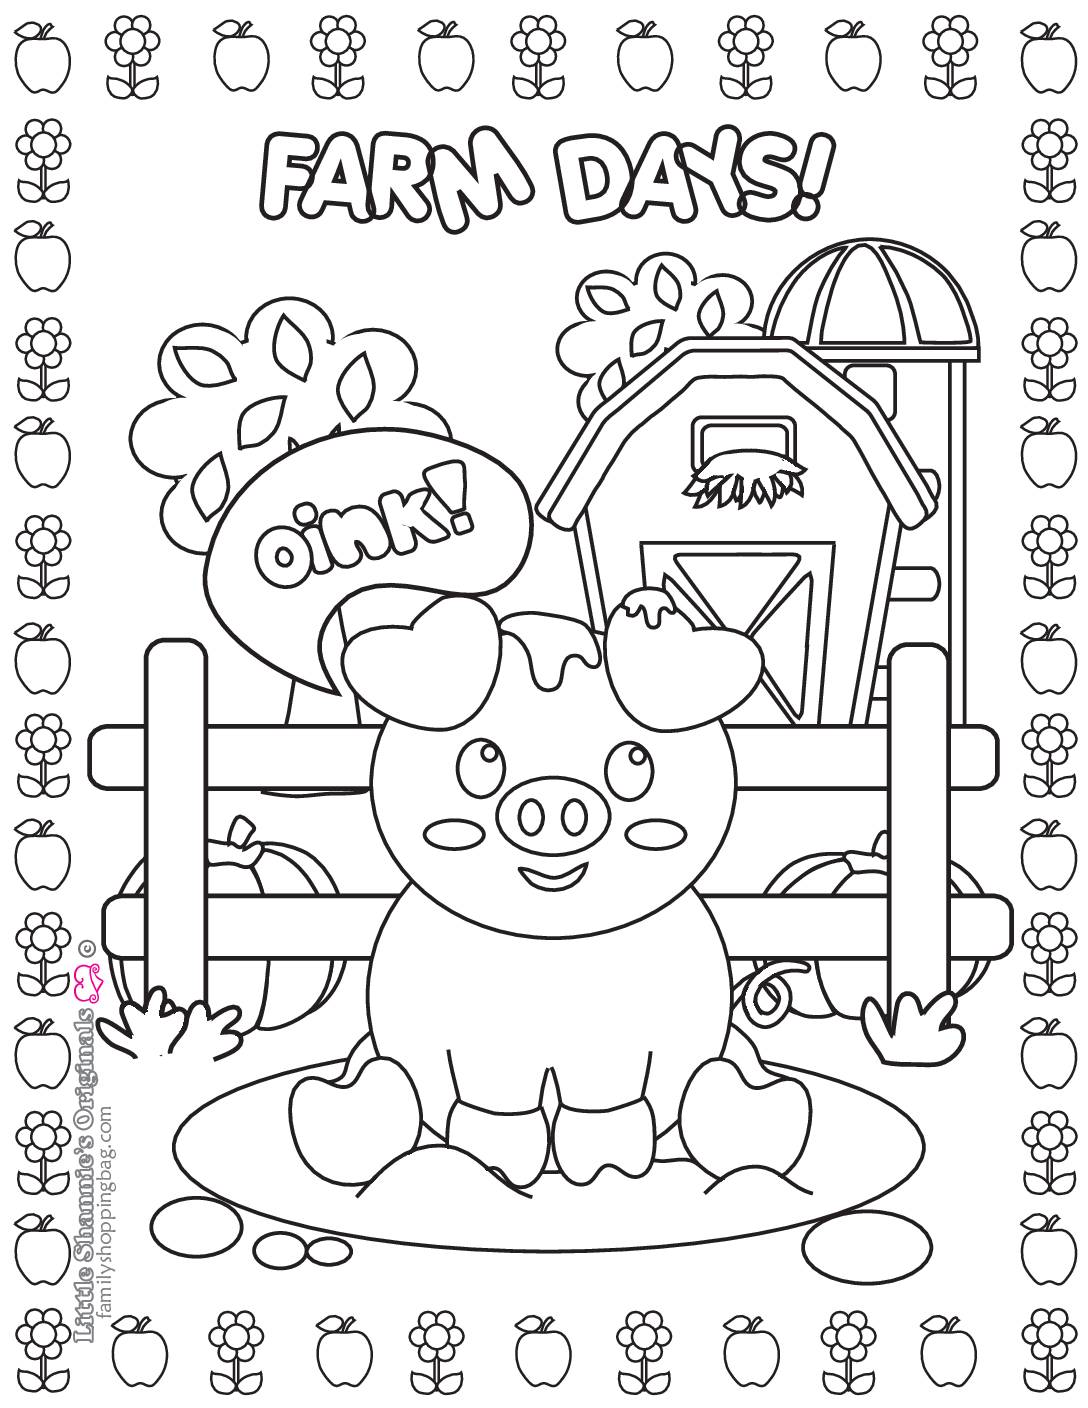 Coloring Page 4 Farm Coloring Pages